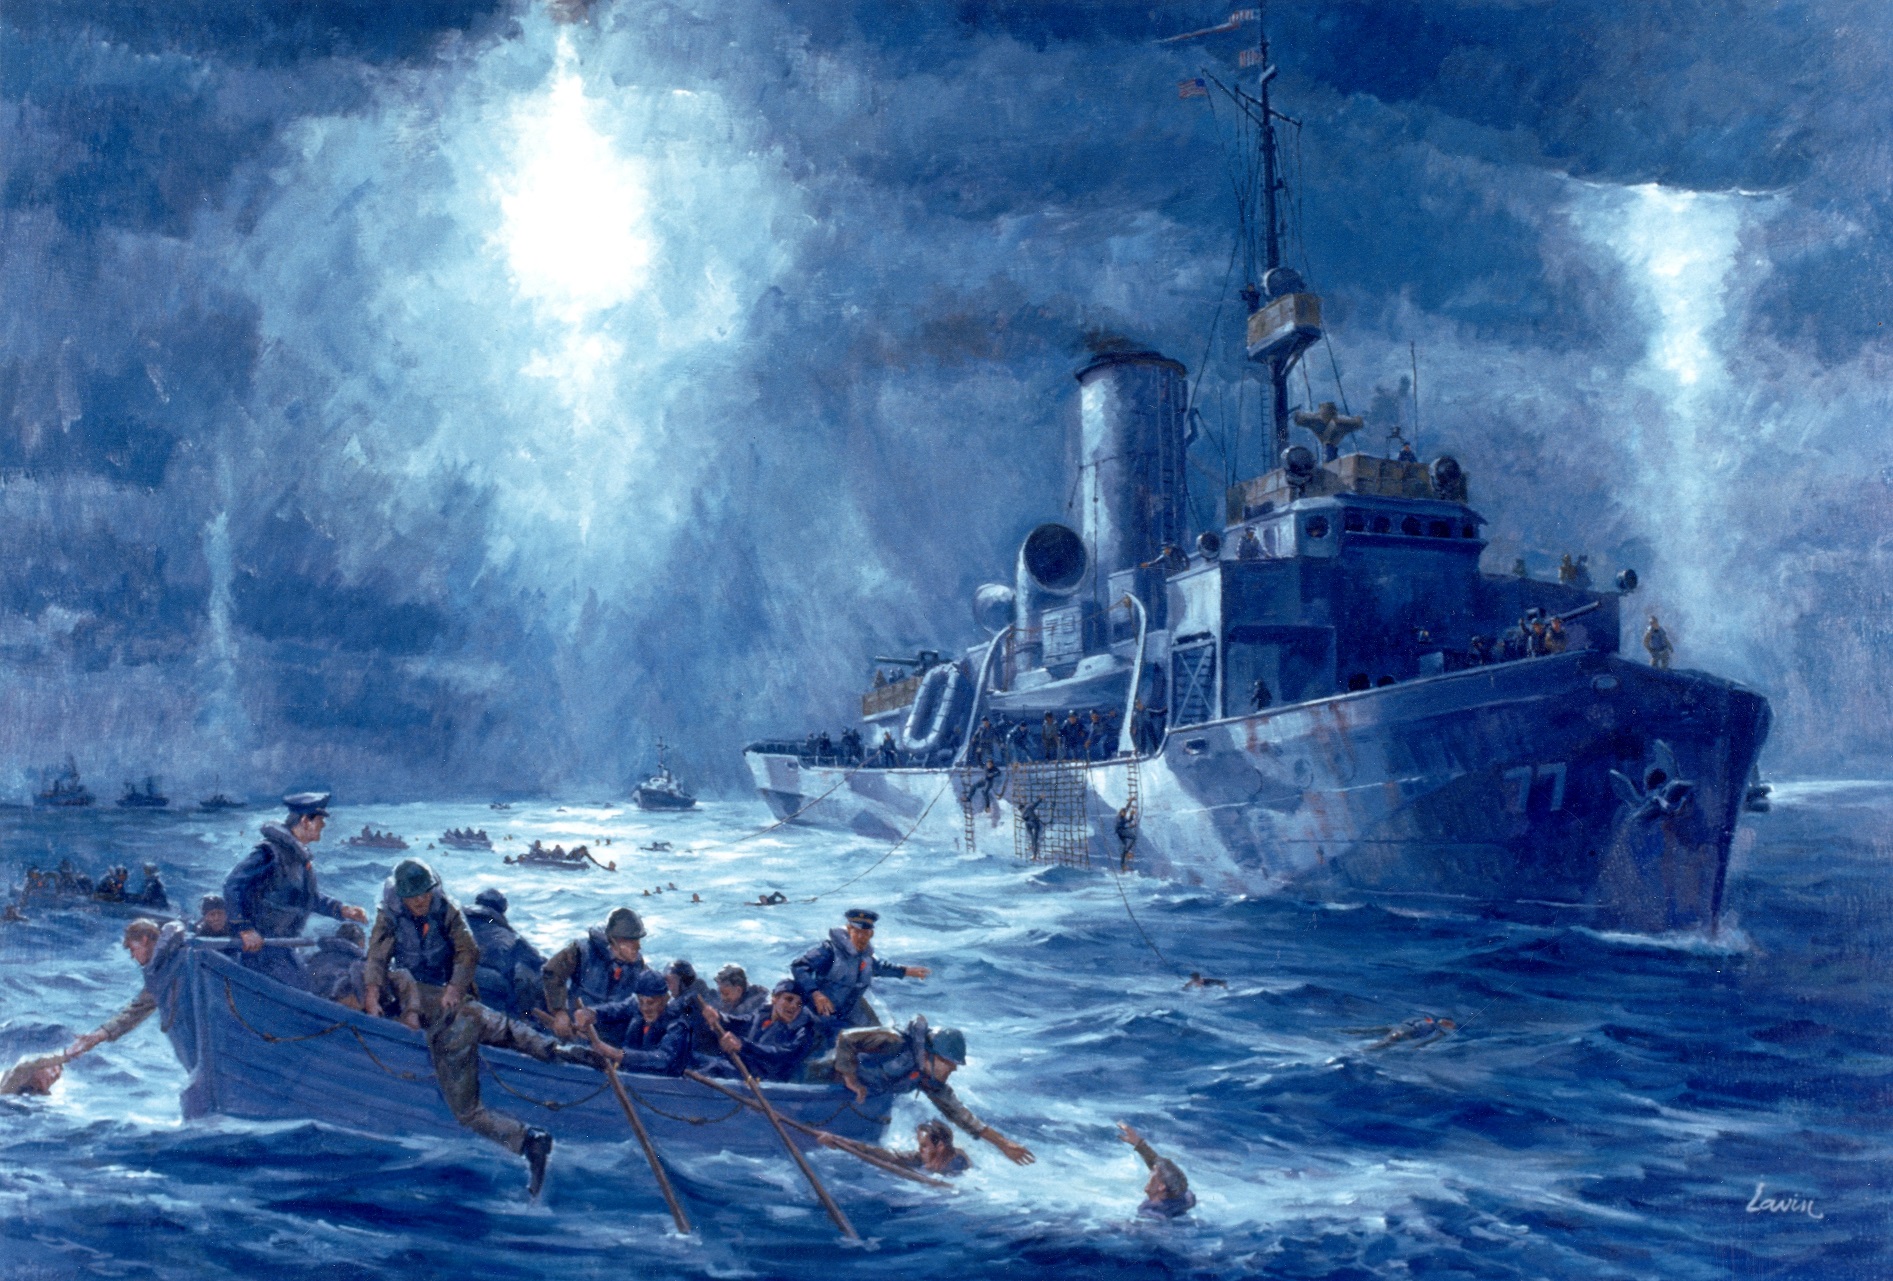 Painting of Escanaba’s rescue operations by an unknown artist. (Courtesy of U.S. Coast Guard)